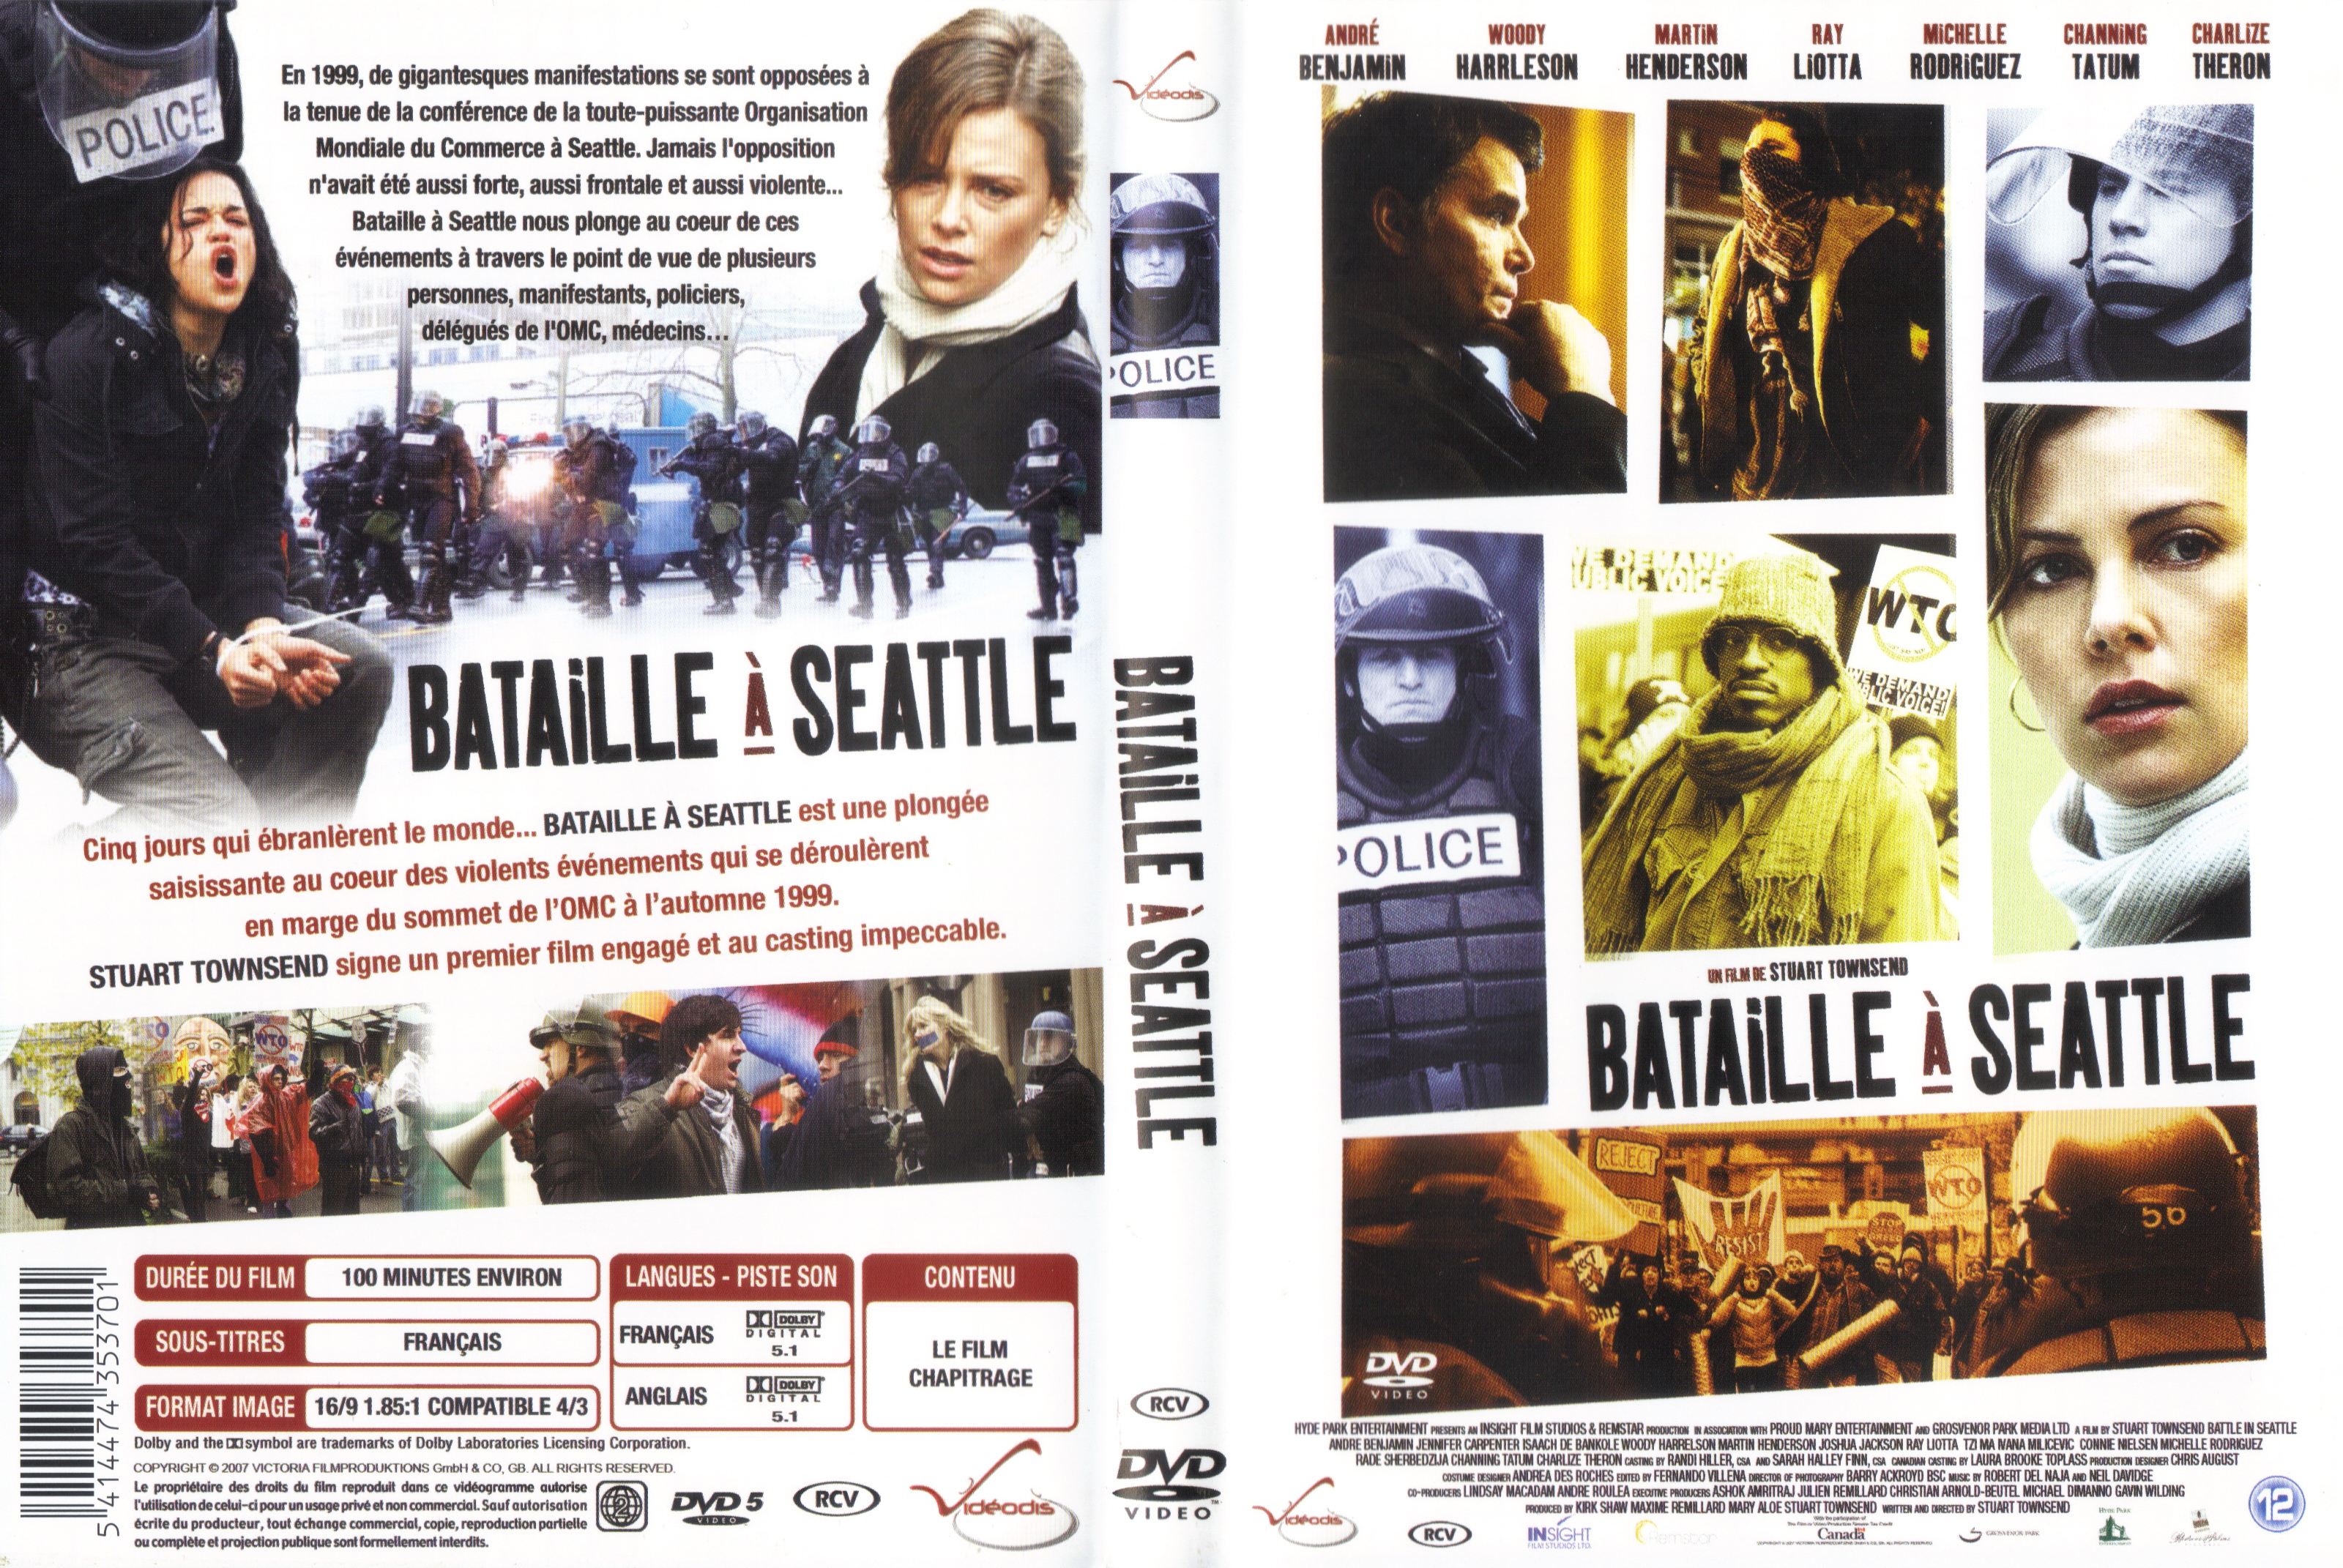 Jaquette DVD Bataille  Seattle v3